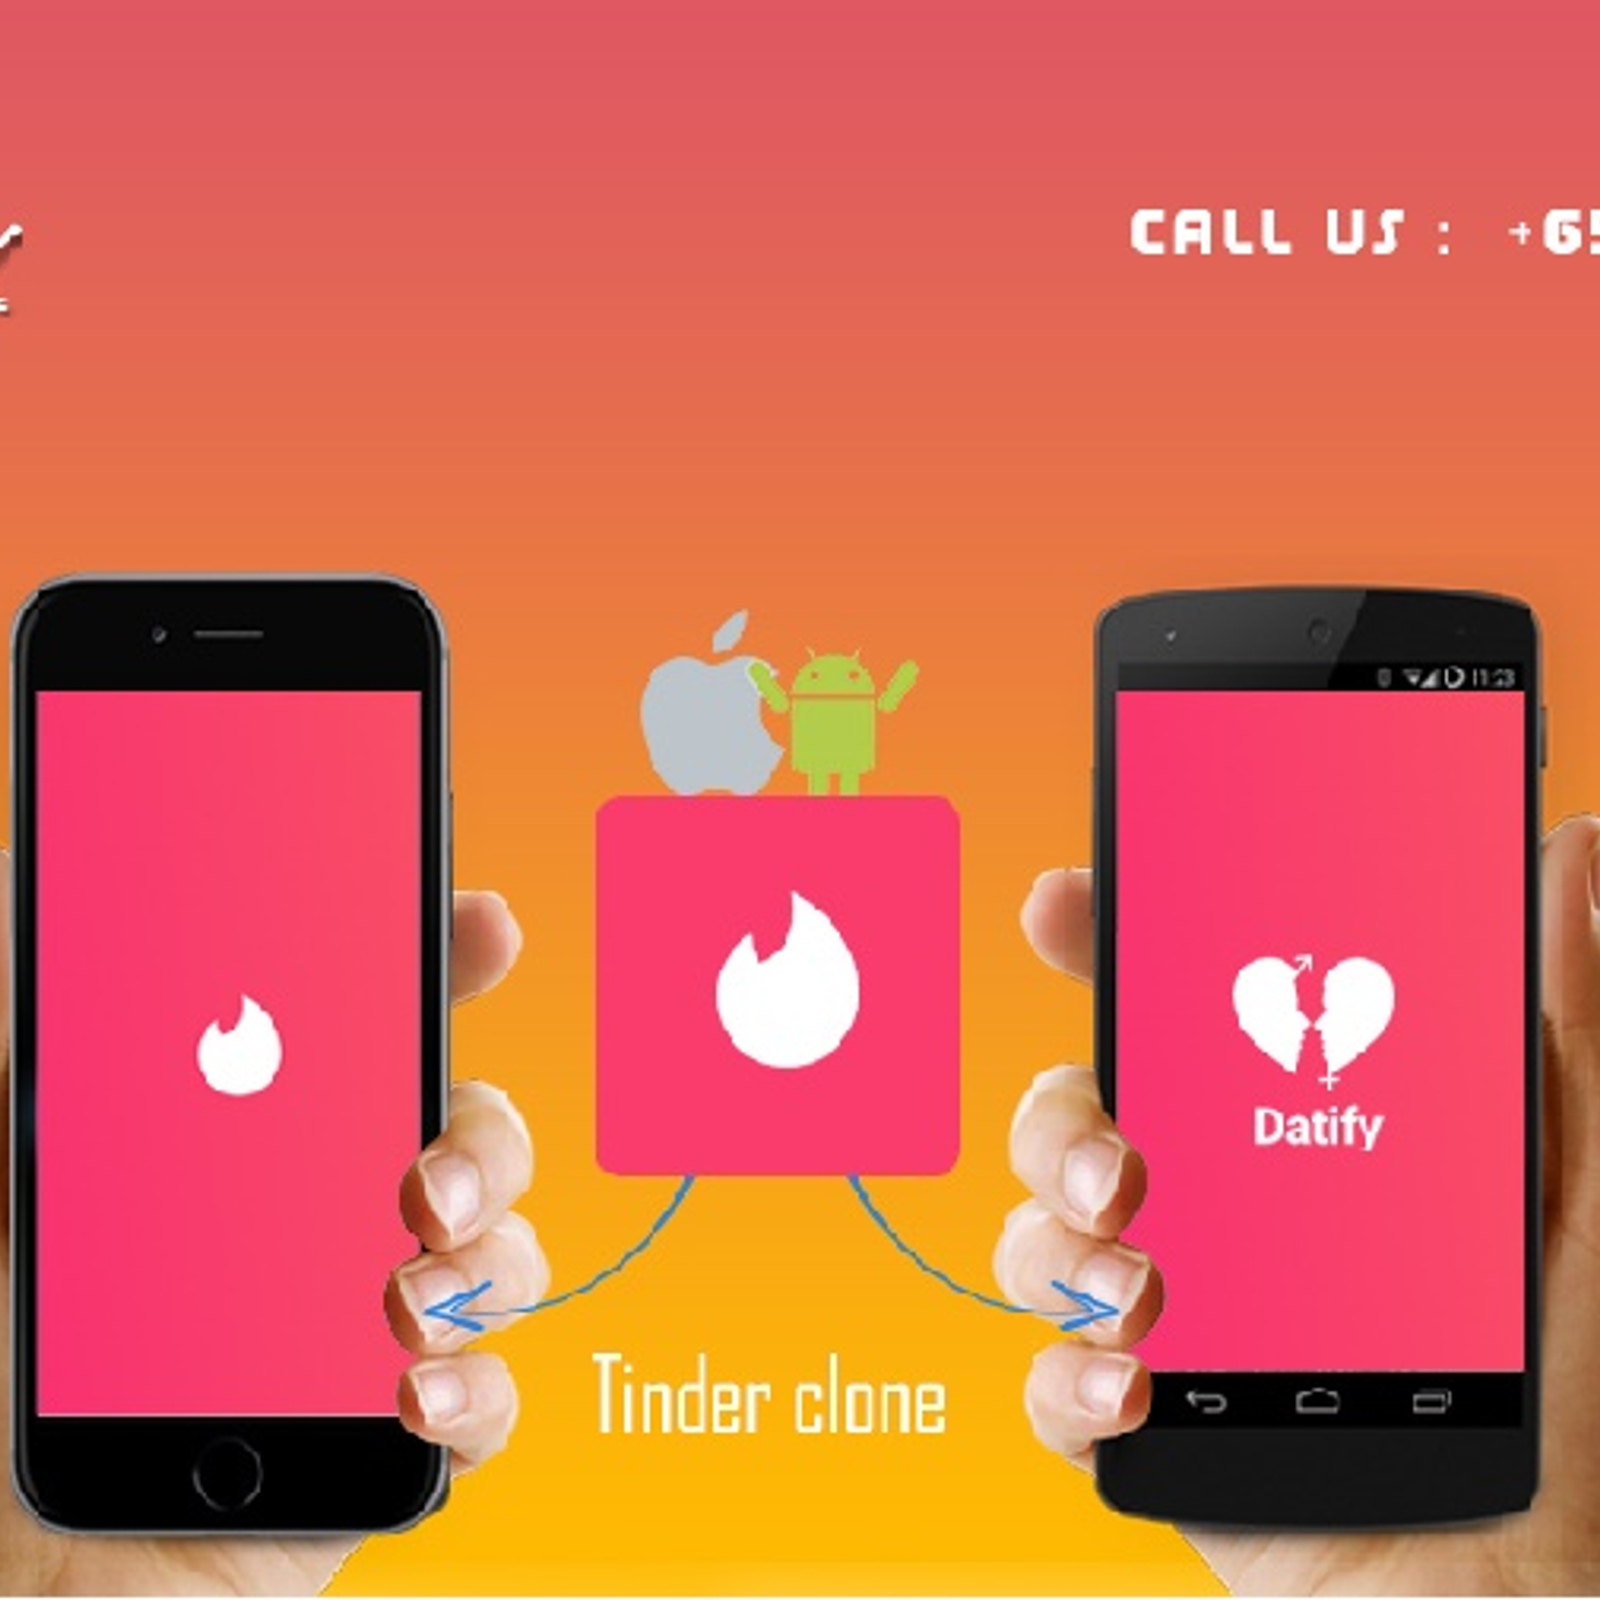 How to find a clone app like Tinder - Quora